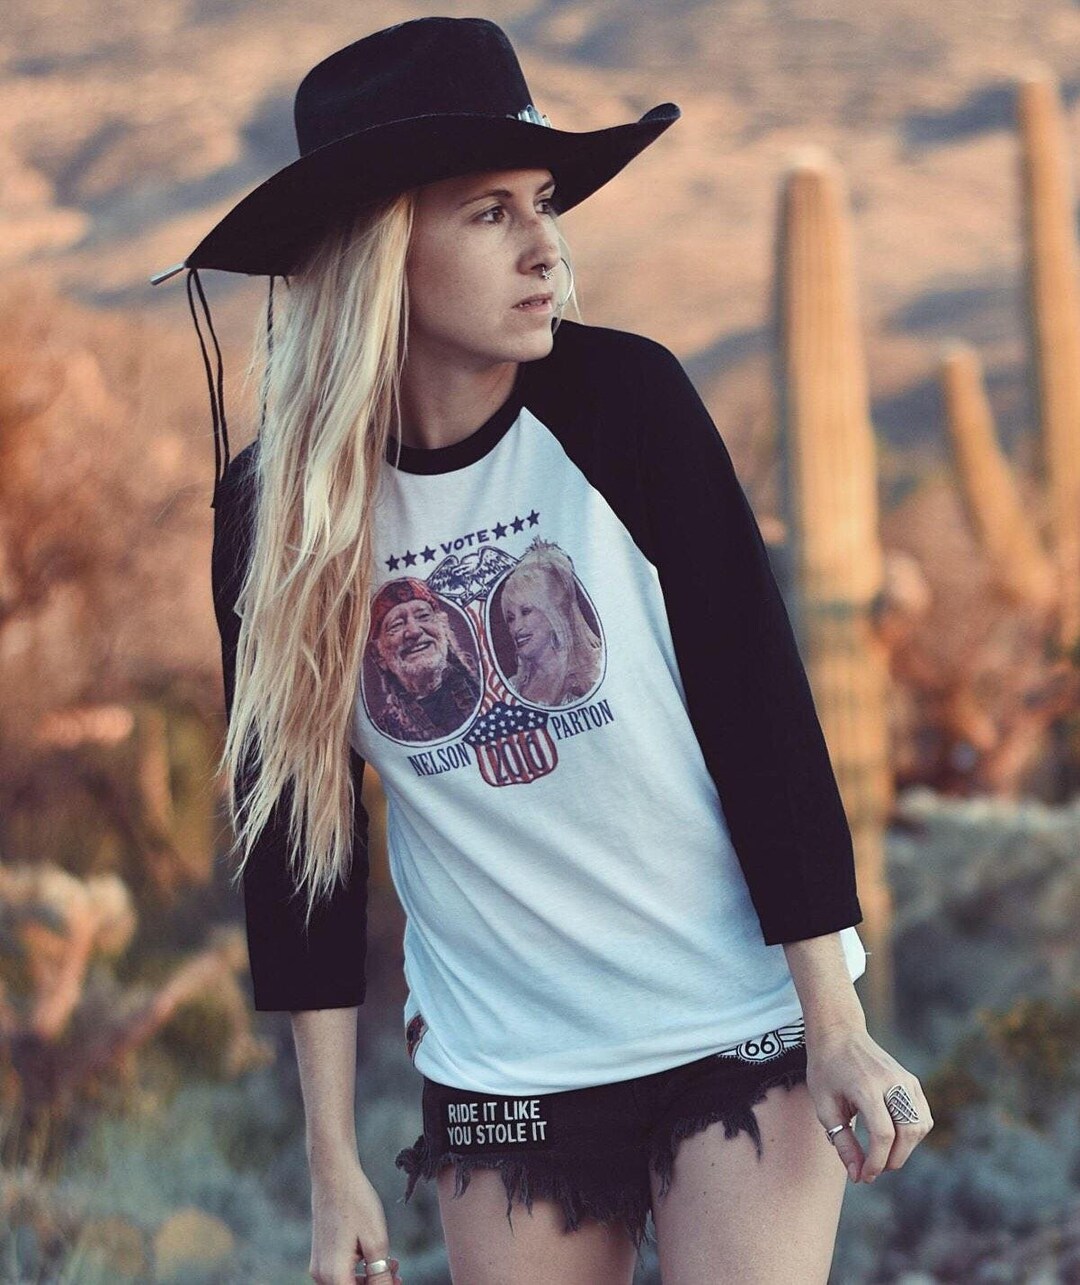 Nelson Parton 2016 Baseball Tee Unsex Willie Nelson Dolly - Etsy